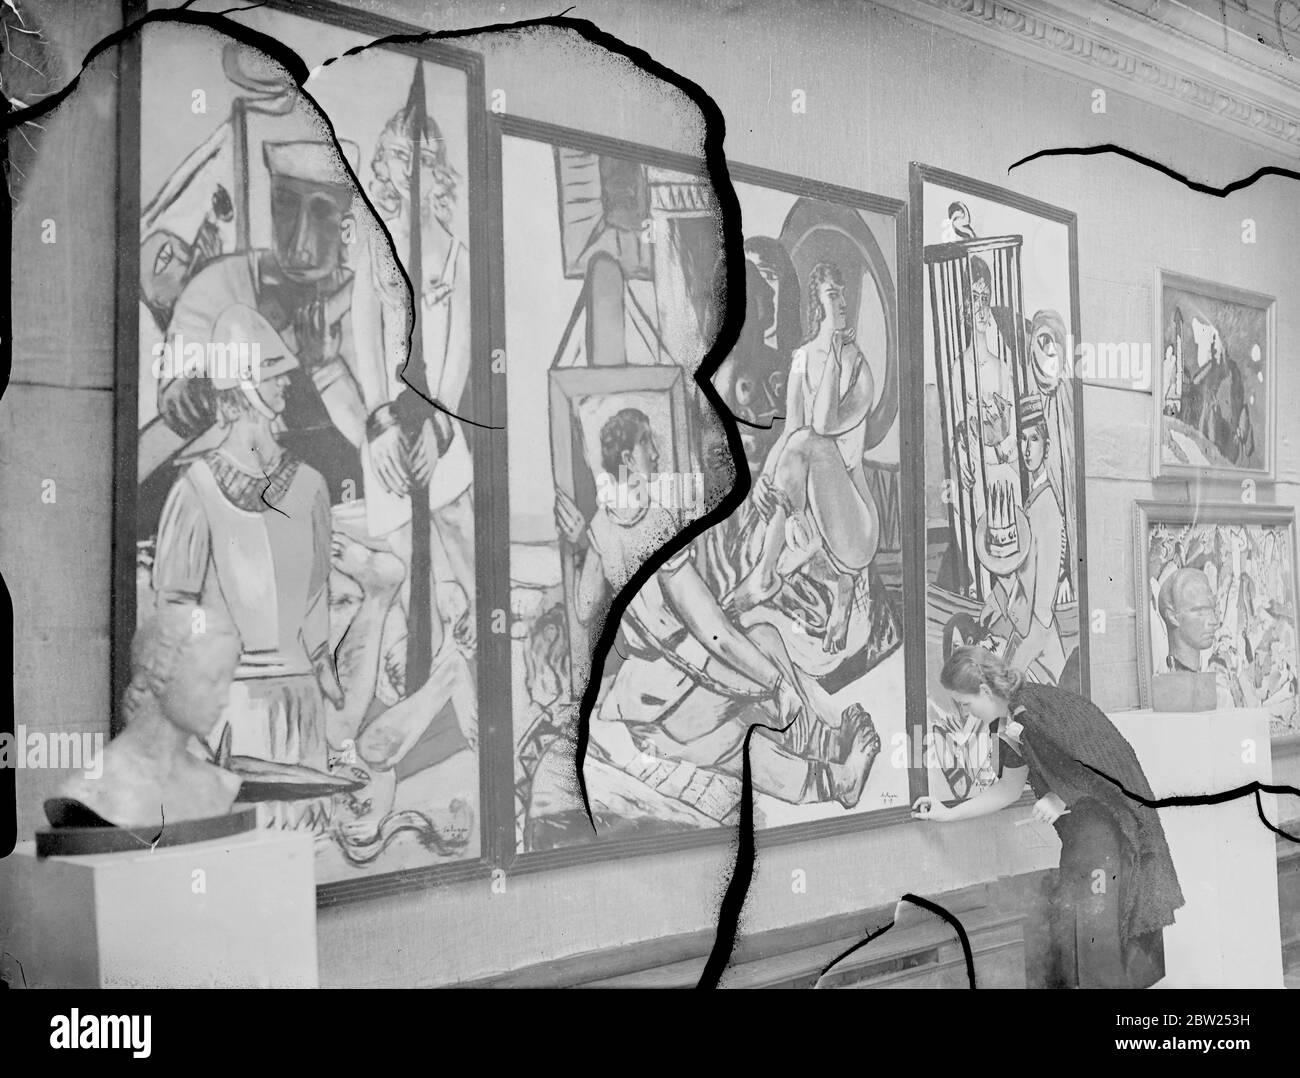 14 Ft expressionist picture on view at 'Degenerate' Art Show in London. Depicts 'Temptations' The priveat view of the Exhibition of 20 century Gorman Art (rejected by the German Nazis as 'degenerate') took place at the New Burlington Galleriers, Burlington Gardens. The Exhibition is to be opened by Mr Augustus John tomorrow (Thursday). The exhibition includes works by all the German artists, most of them now in exile, whom Hitler pilloried in the famous 'degenerate Art' exhibited at Munich last year. Photo shows, Mme Irmgard Burchard, honorary organiser of the Exhibition, arranging the work wh Stock Photo